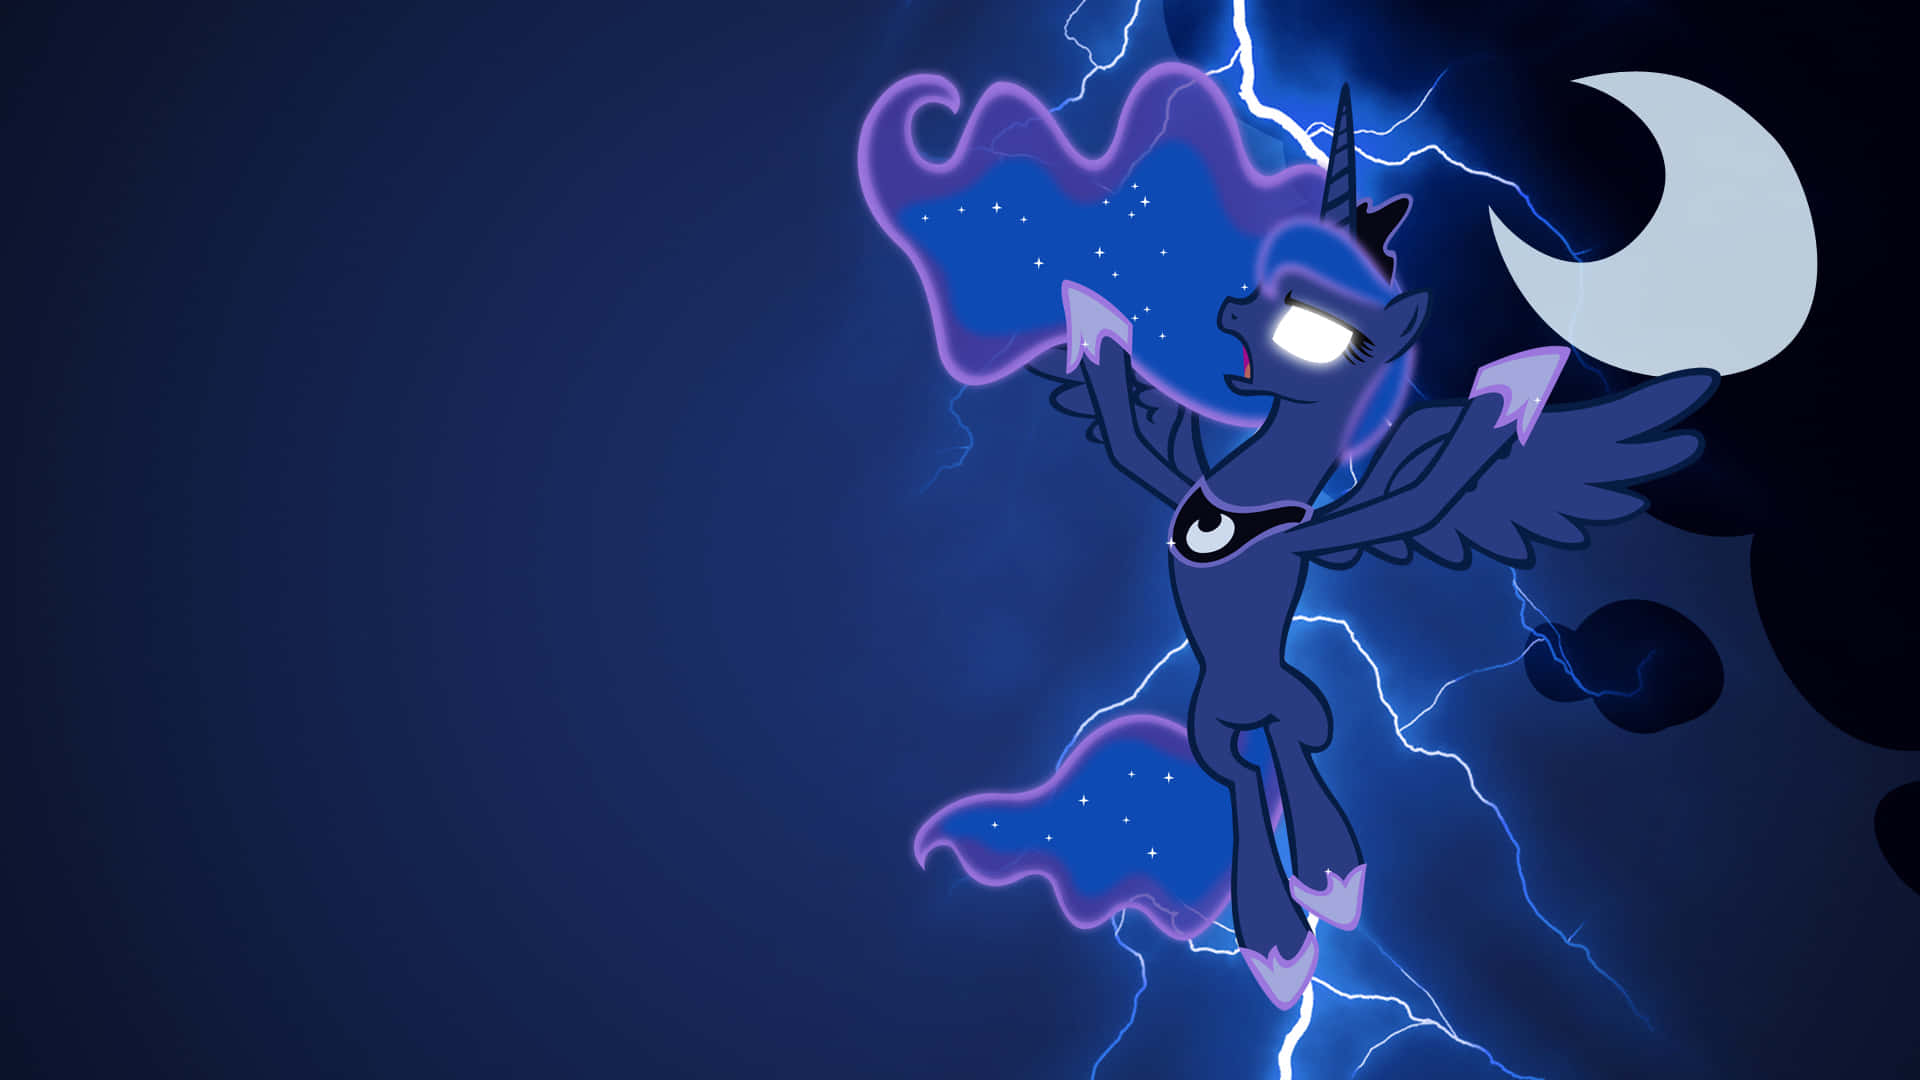 "The ominous Nightmare Moon illuminated against a blanket of stars" Wallpaper